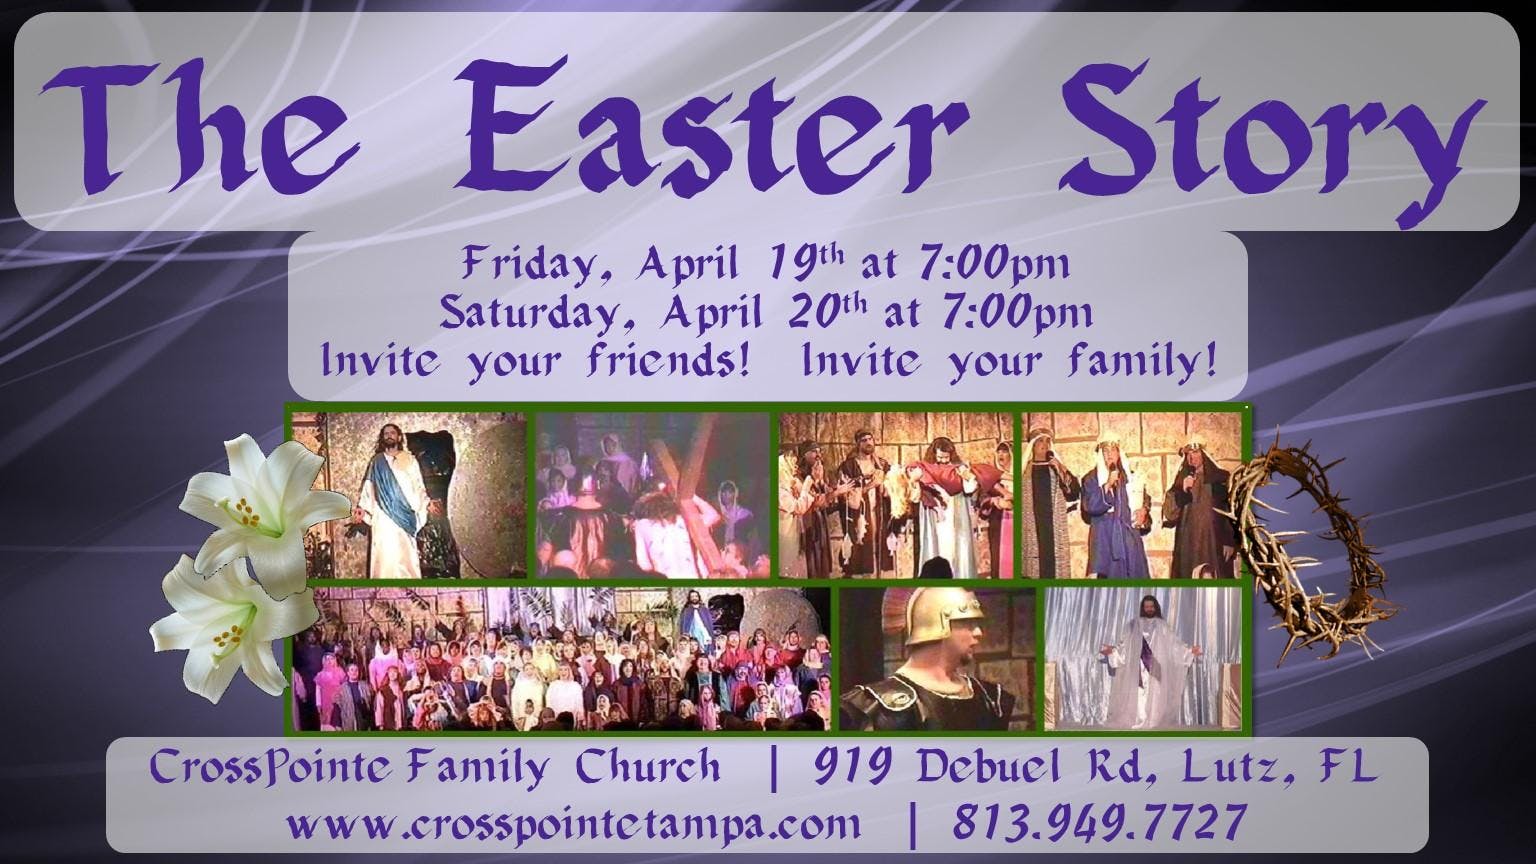 The Easter Story Production